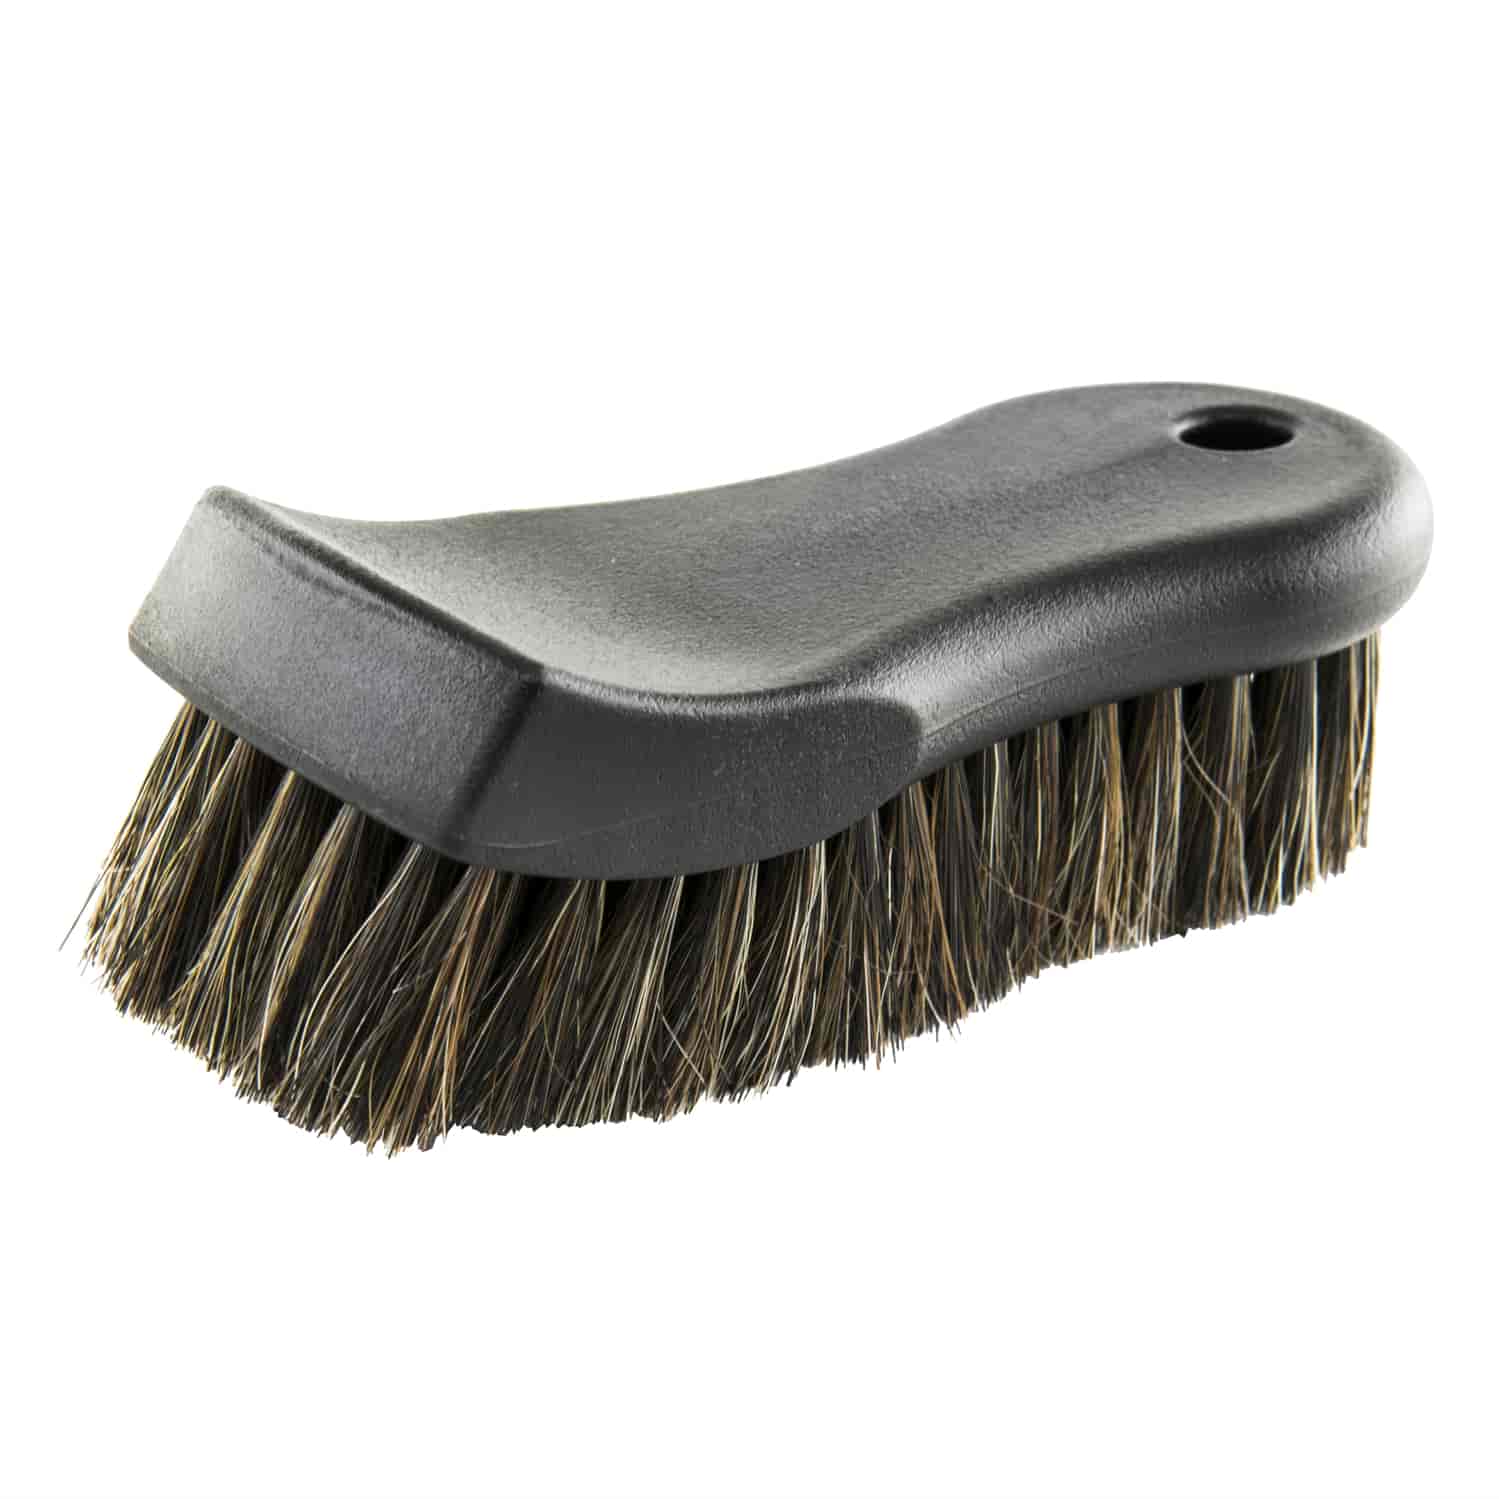 CHEMICAL GUYS NIFTY INTERIOR CARPET CLEANING BRUSH 